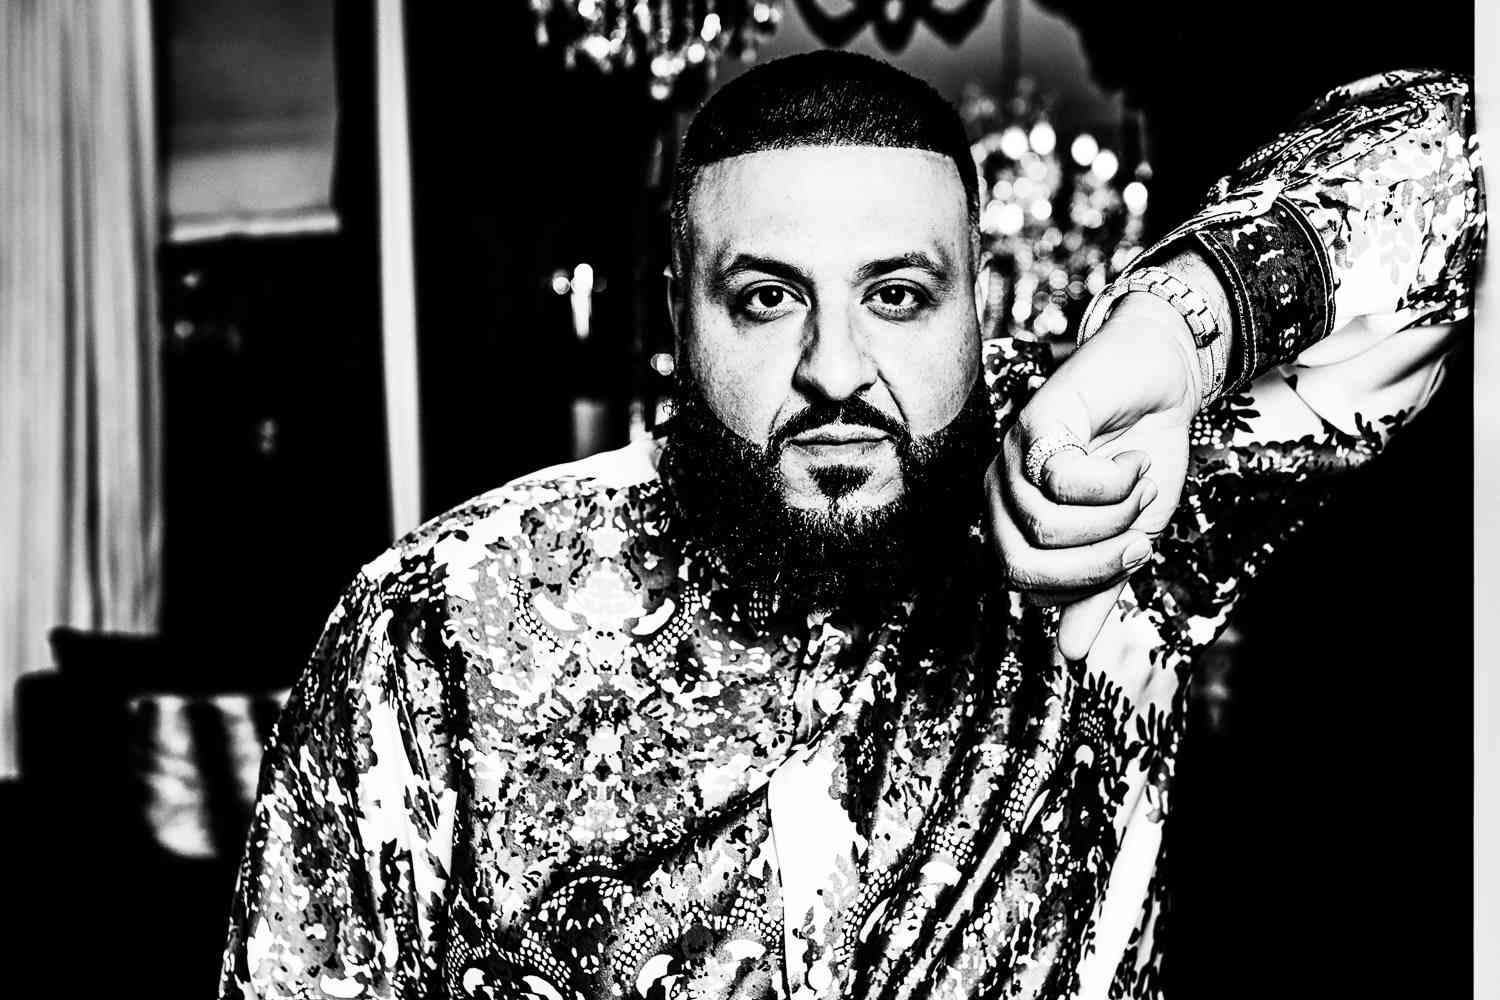 Iconic image of Dj khaled new album/song cover by Warwick Saint